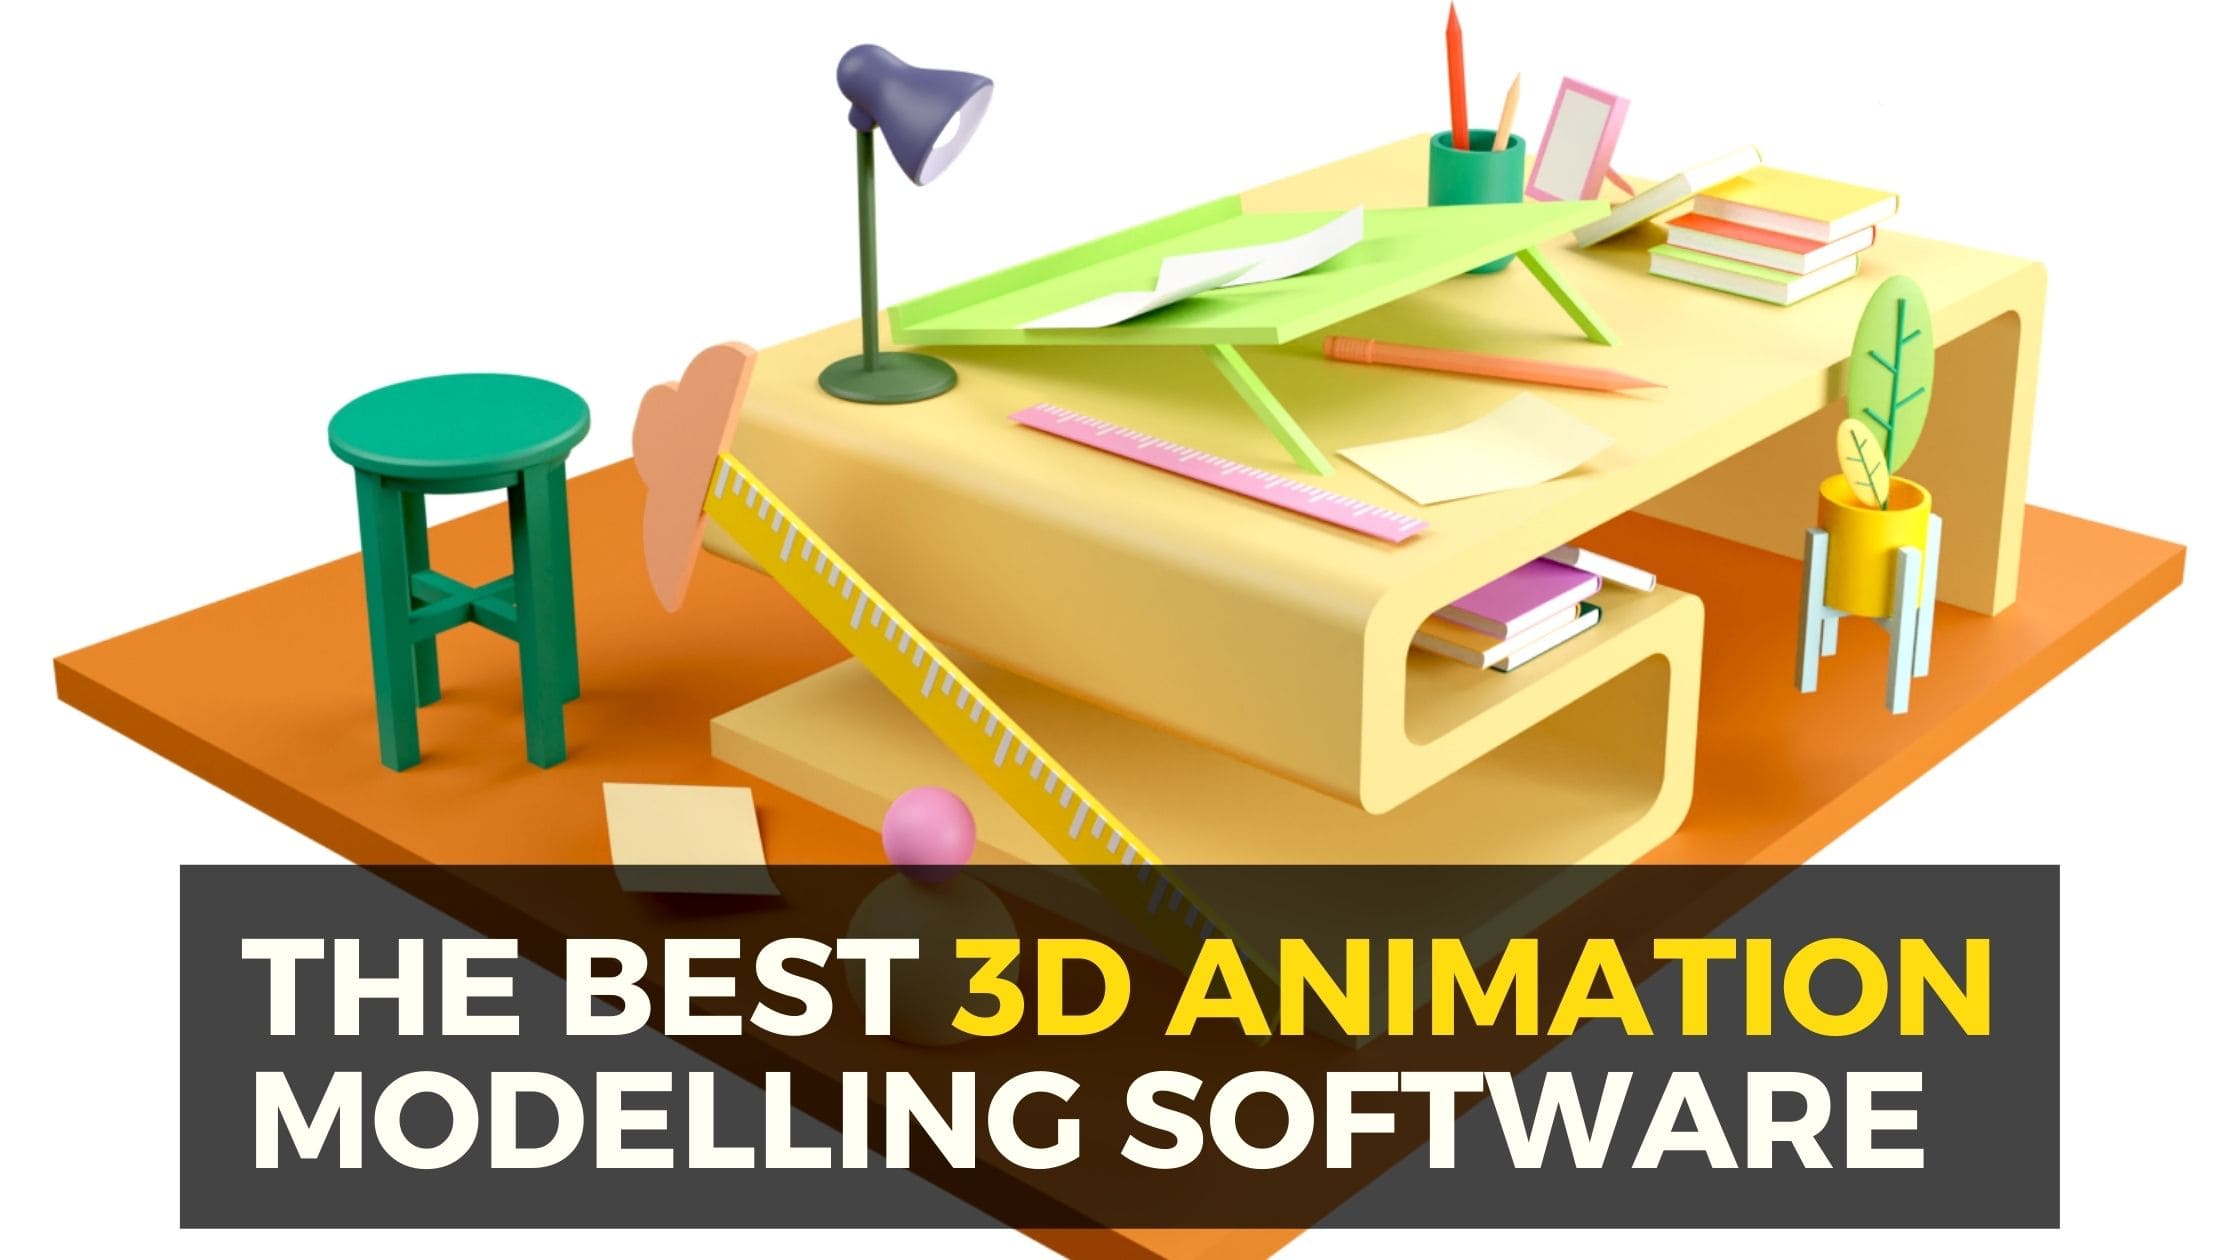 Which is the Best 3D Animation Modelling Software in 2022